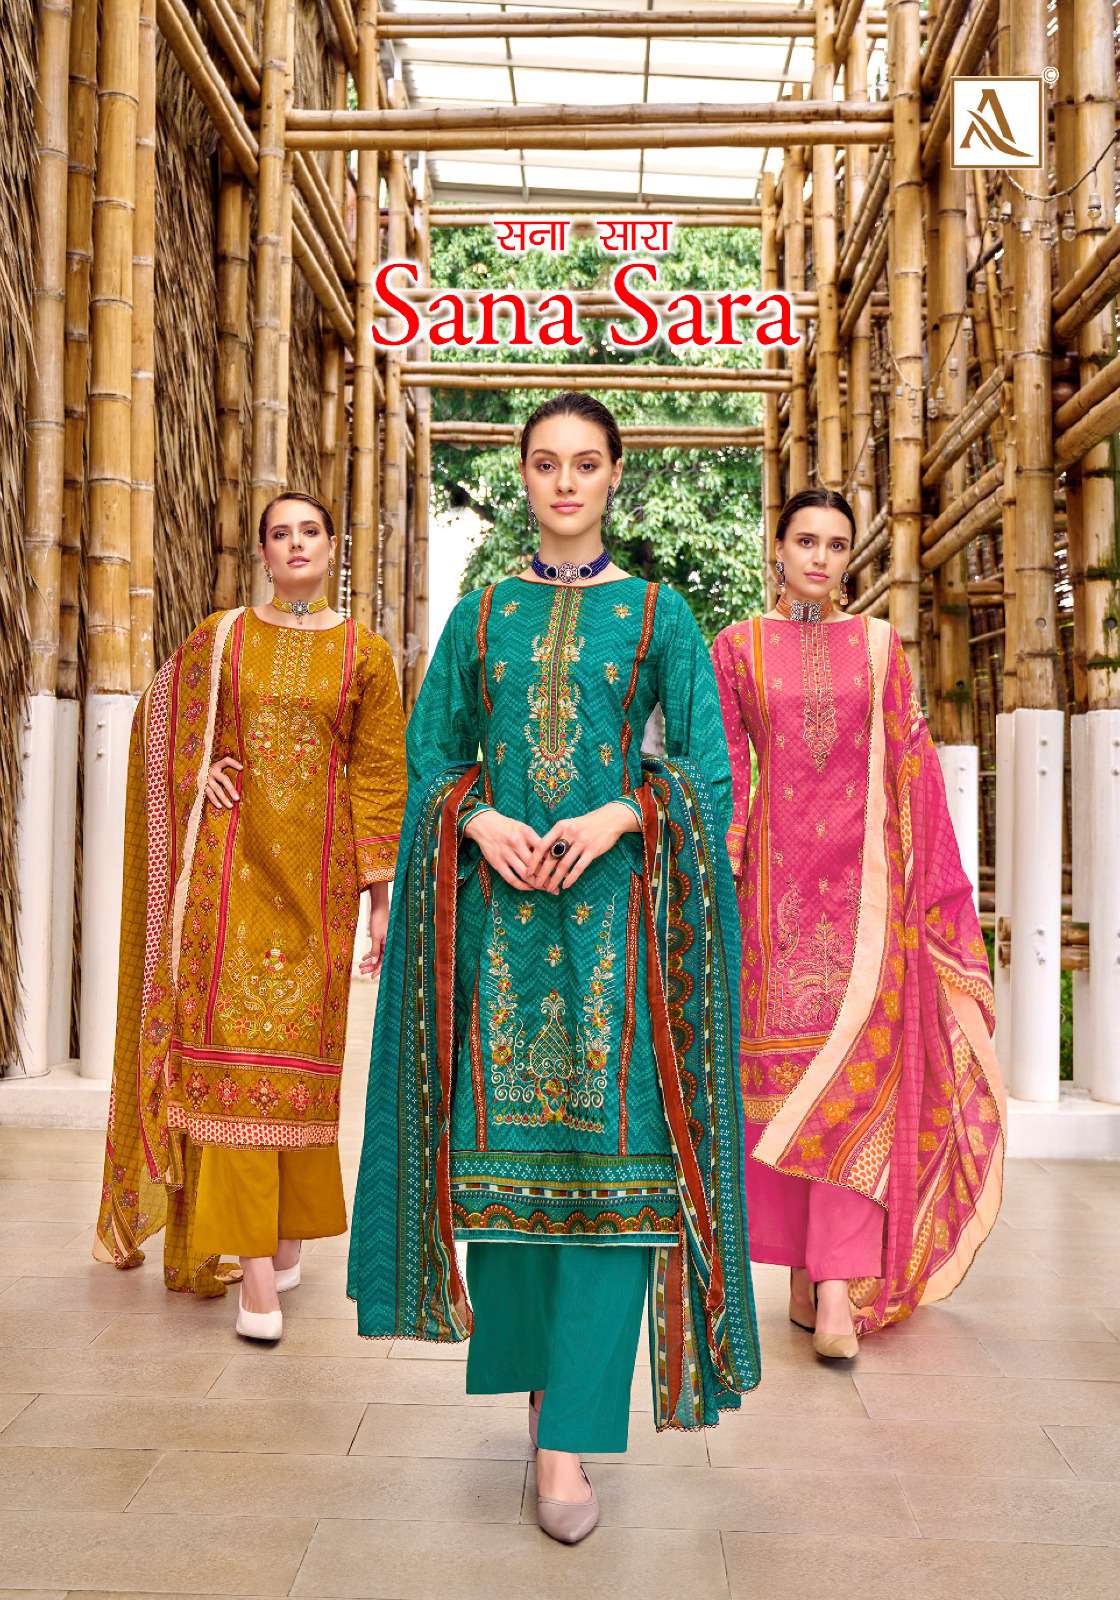 SANA SARA BY ALOK SUIT 1427-001 TO 1427-008 DESIGNER COTTON EMBROIDERY DRESSES